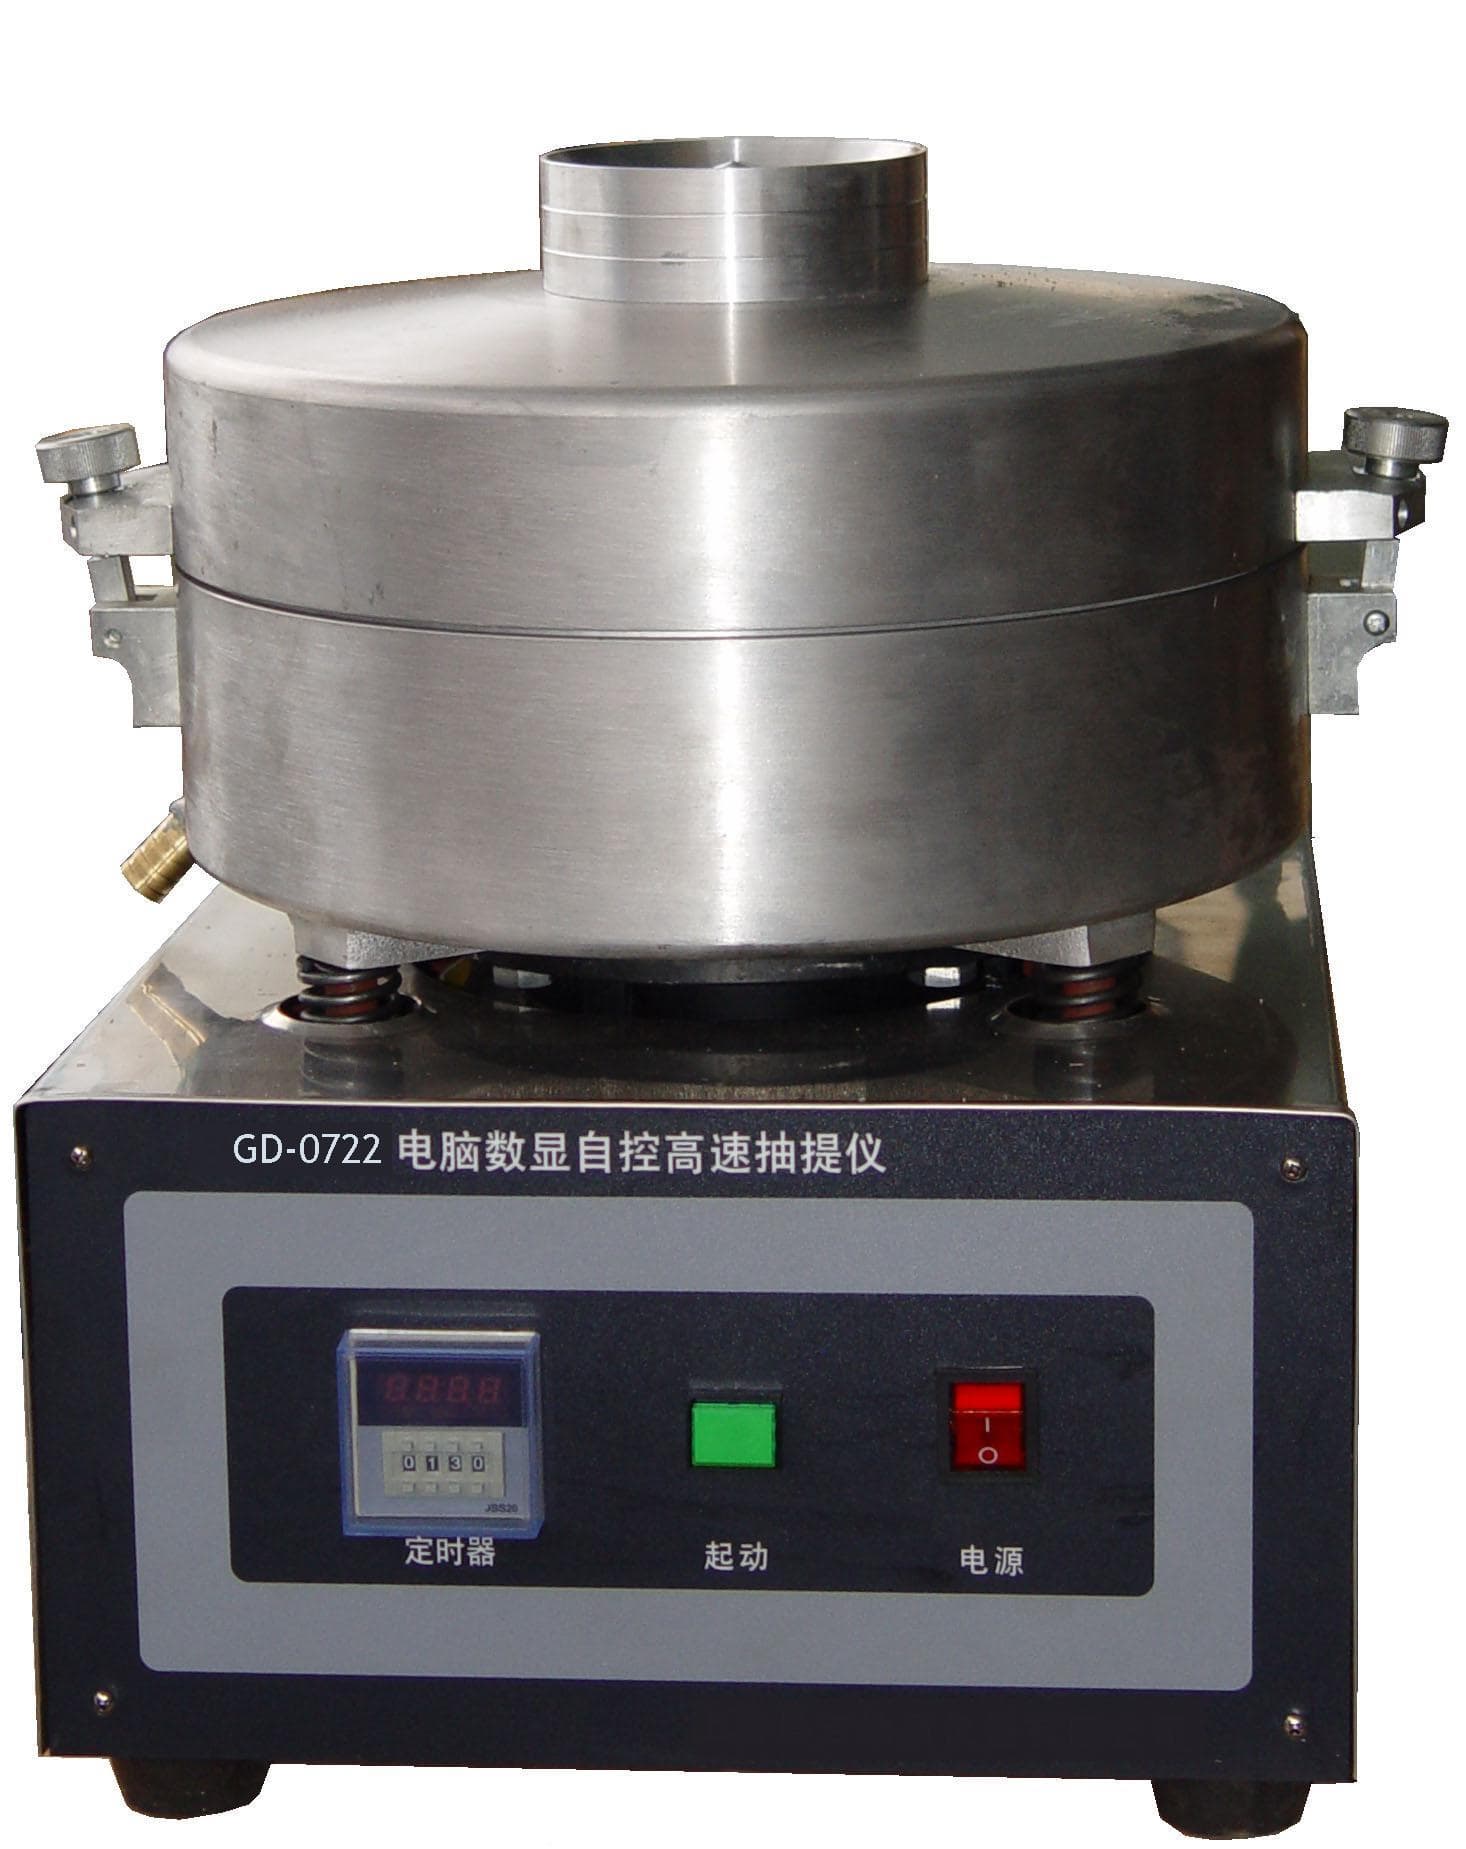 GD-0722 Centrifugal Extractor